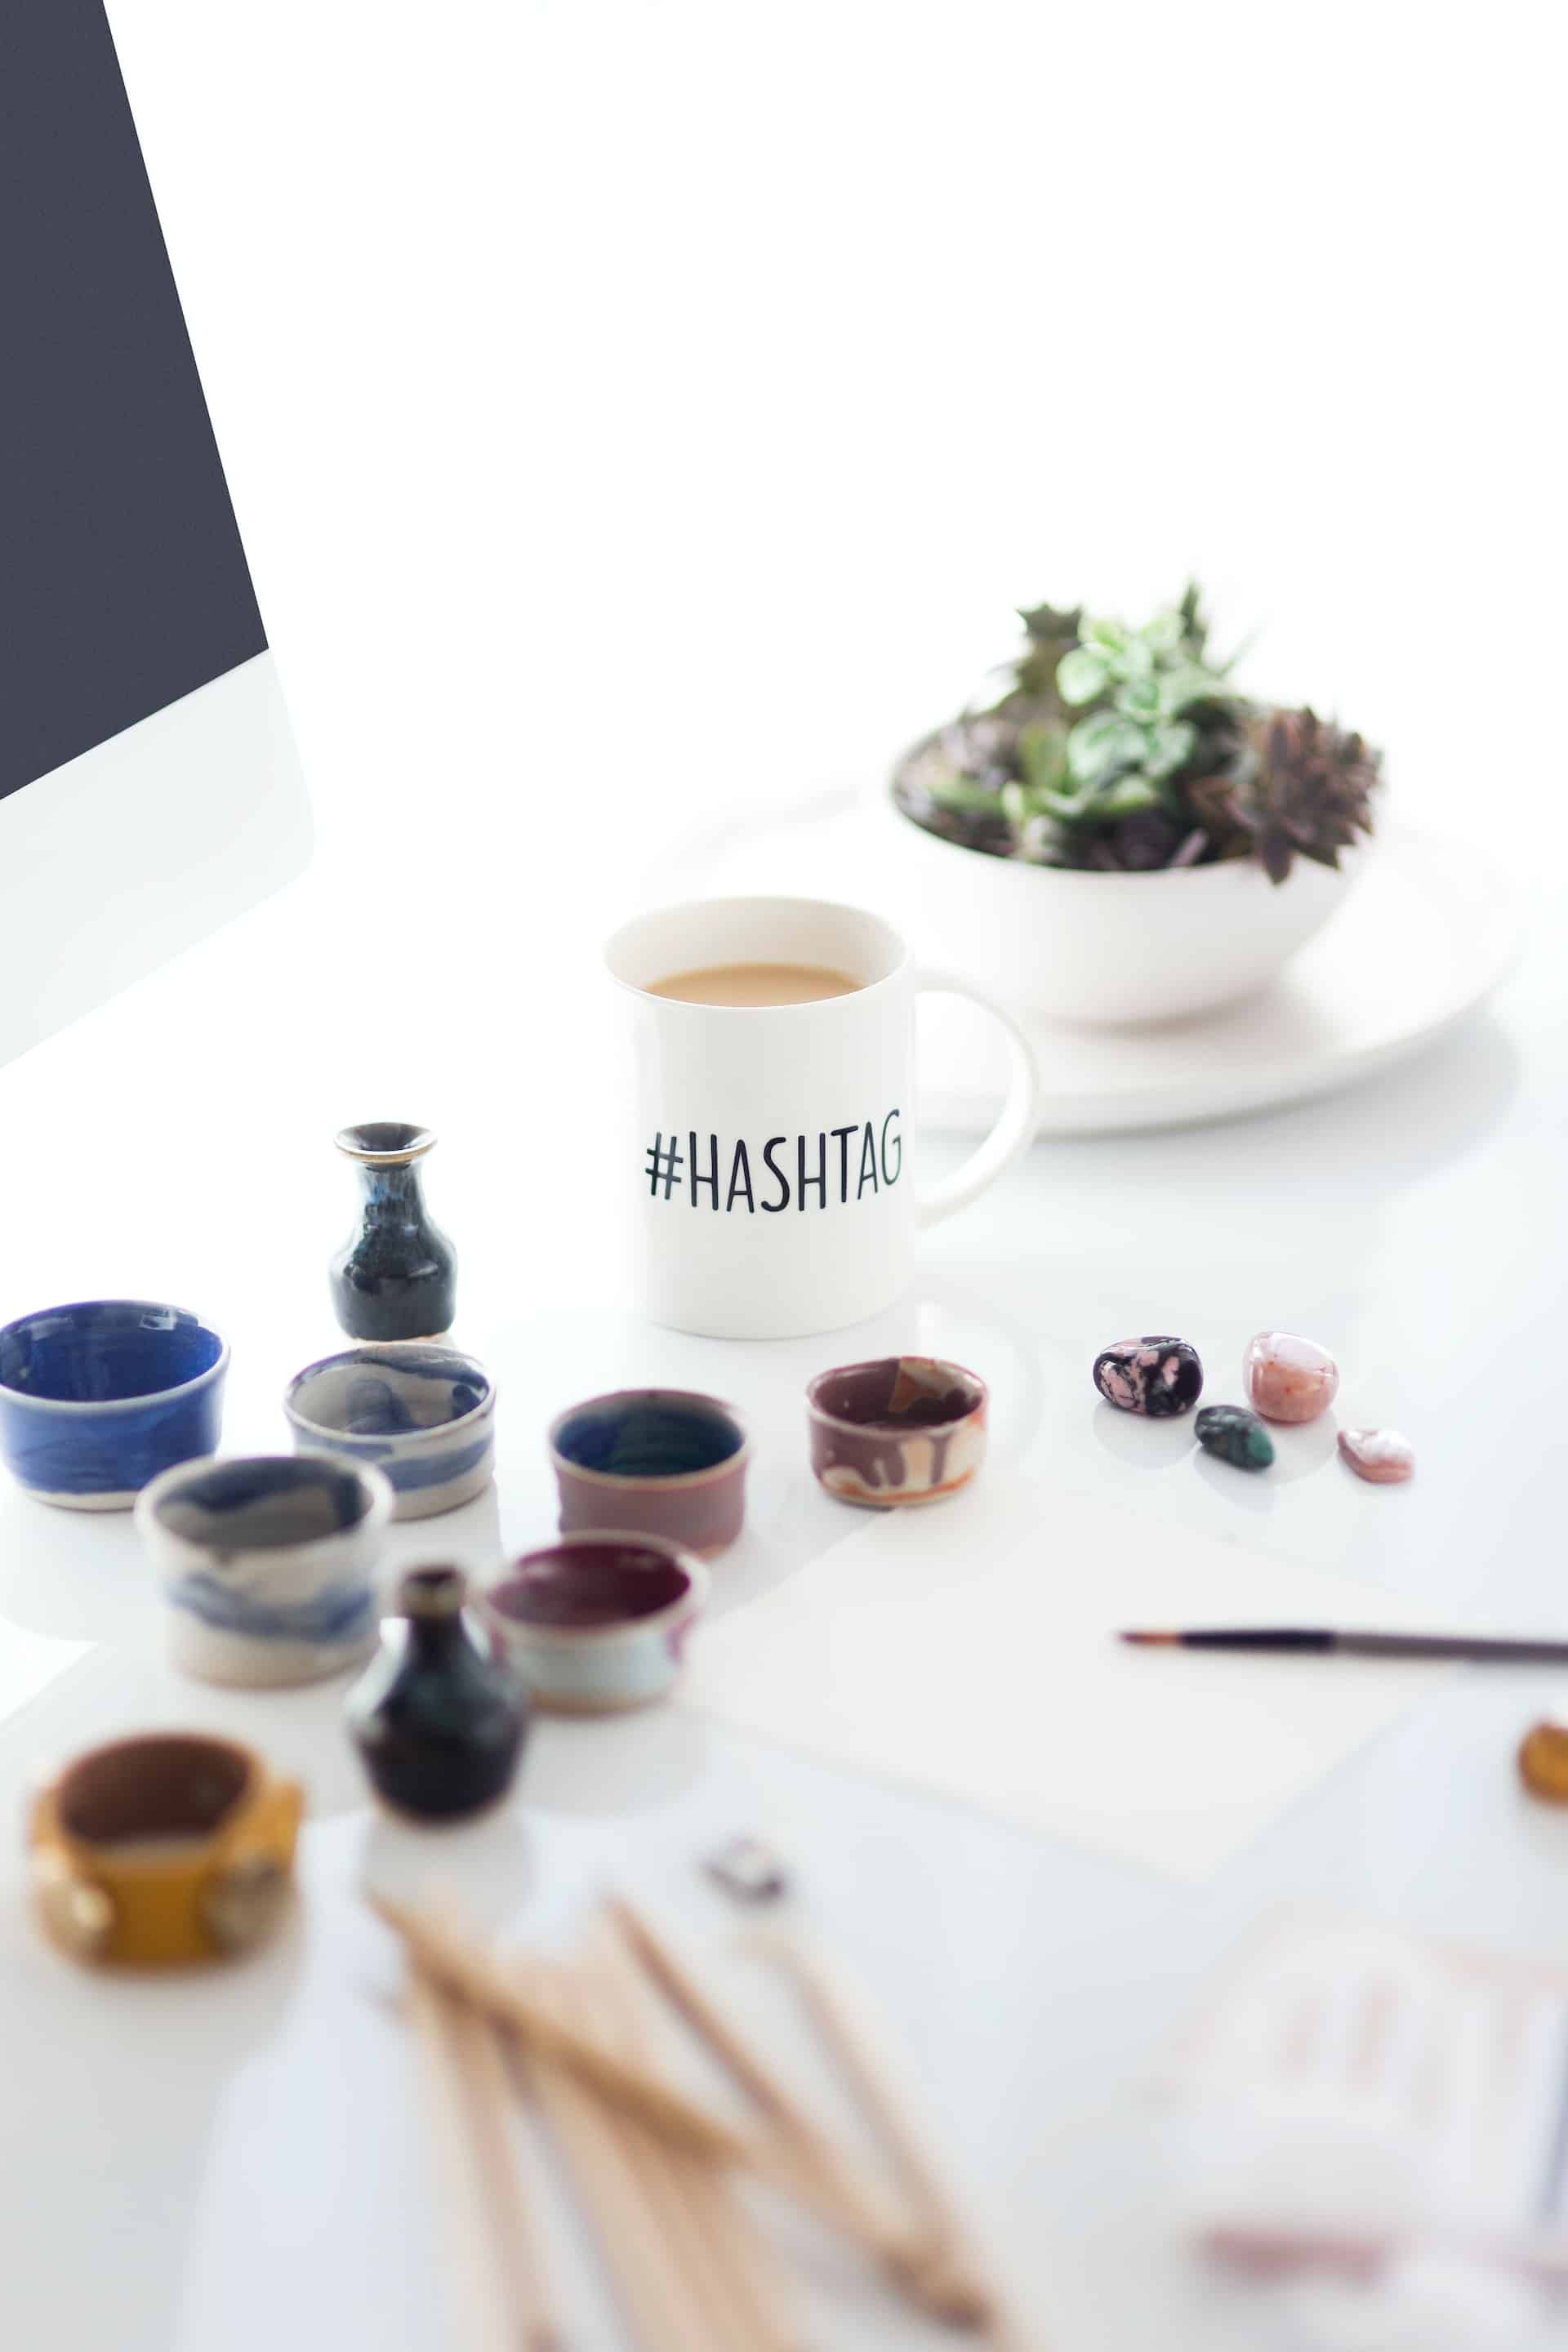 How Use Hashtags Location Tags Article Image